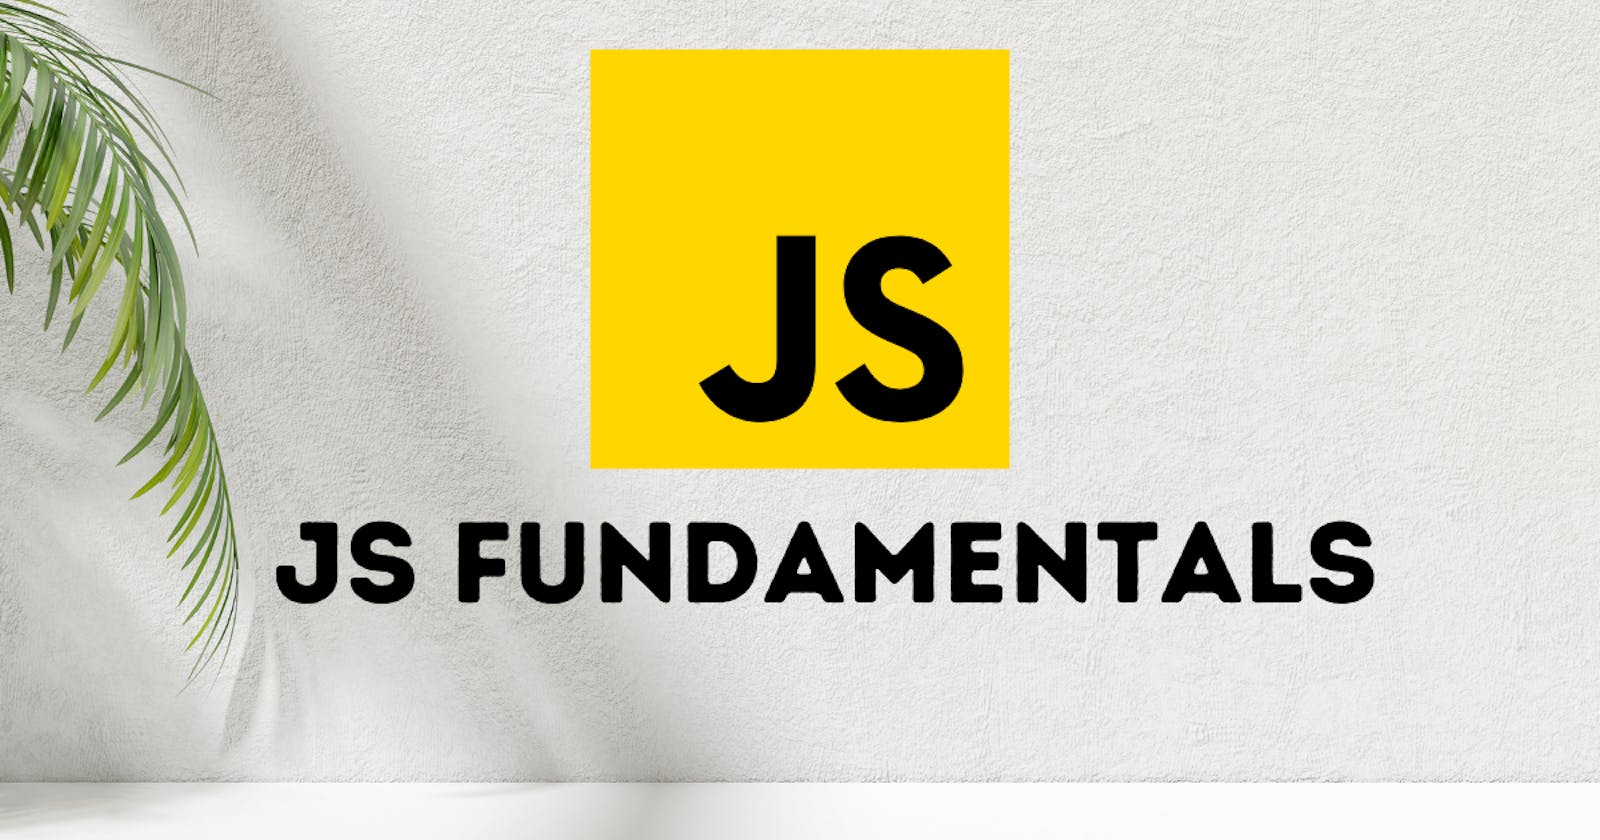 Introduction to JavaScript: An overview of JavaScript fundamentals.